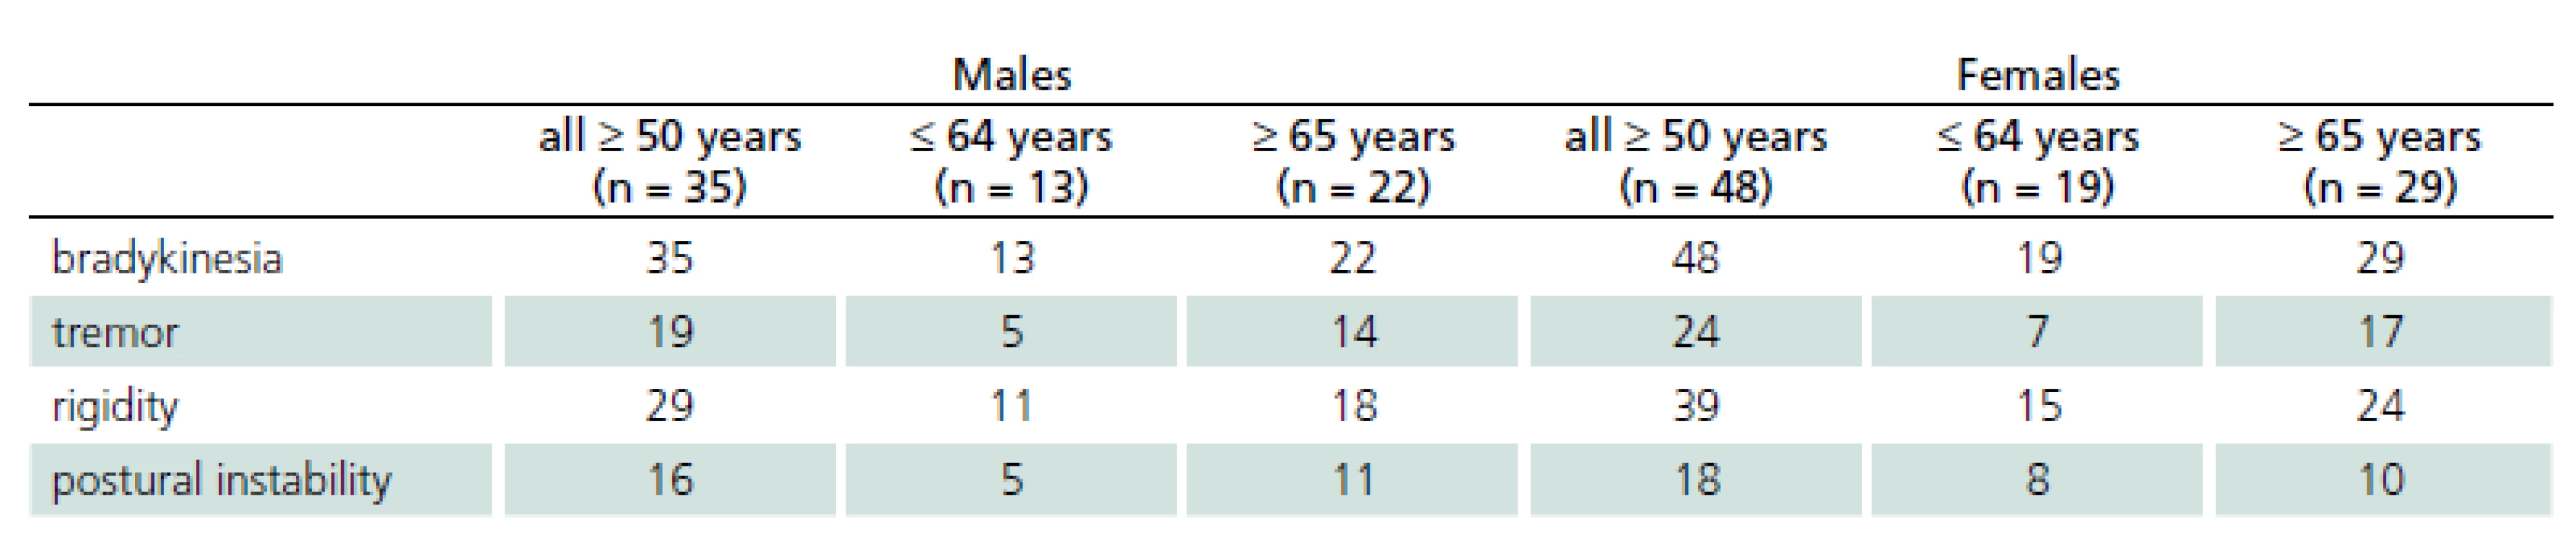 Number of patients in different age groups and presence of clinical signs of parkinsonism.